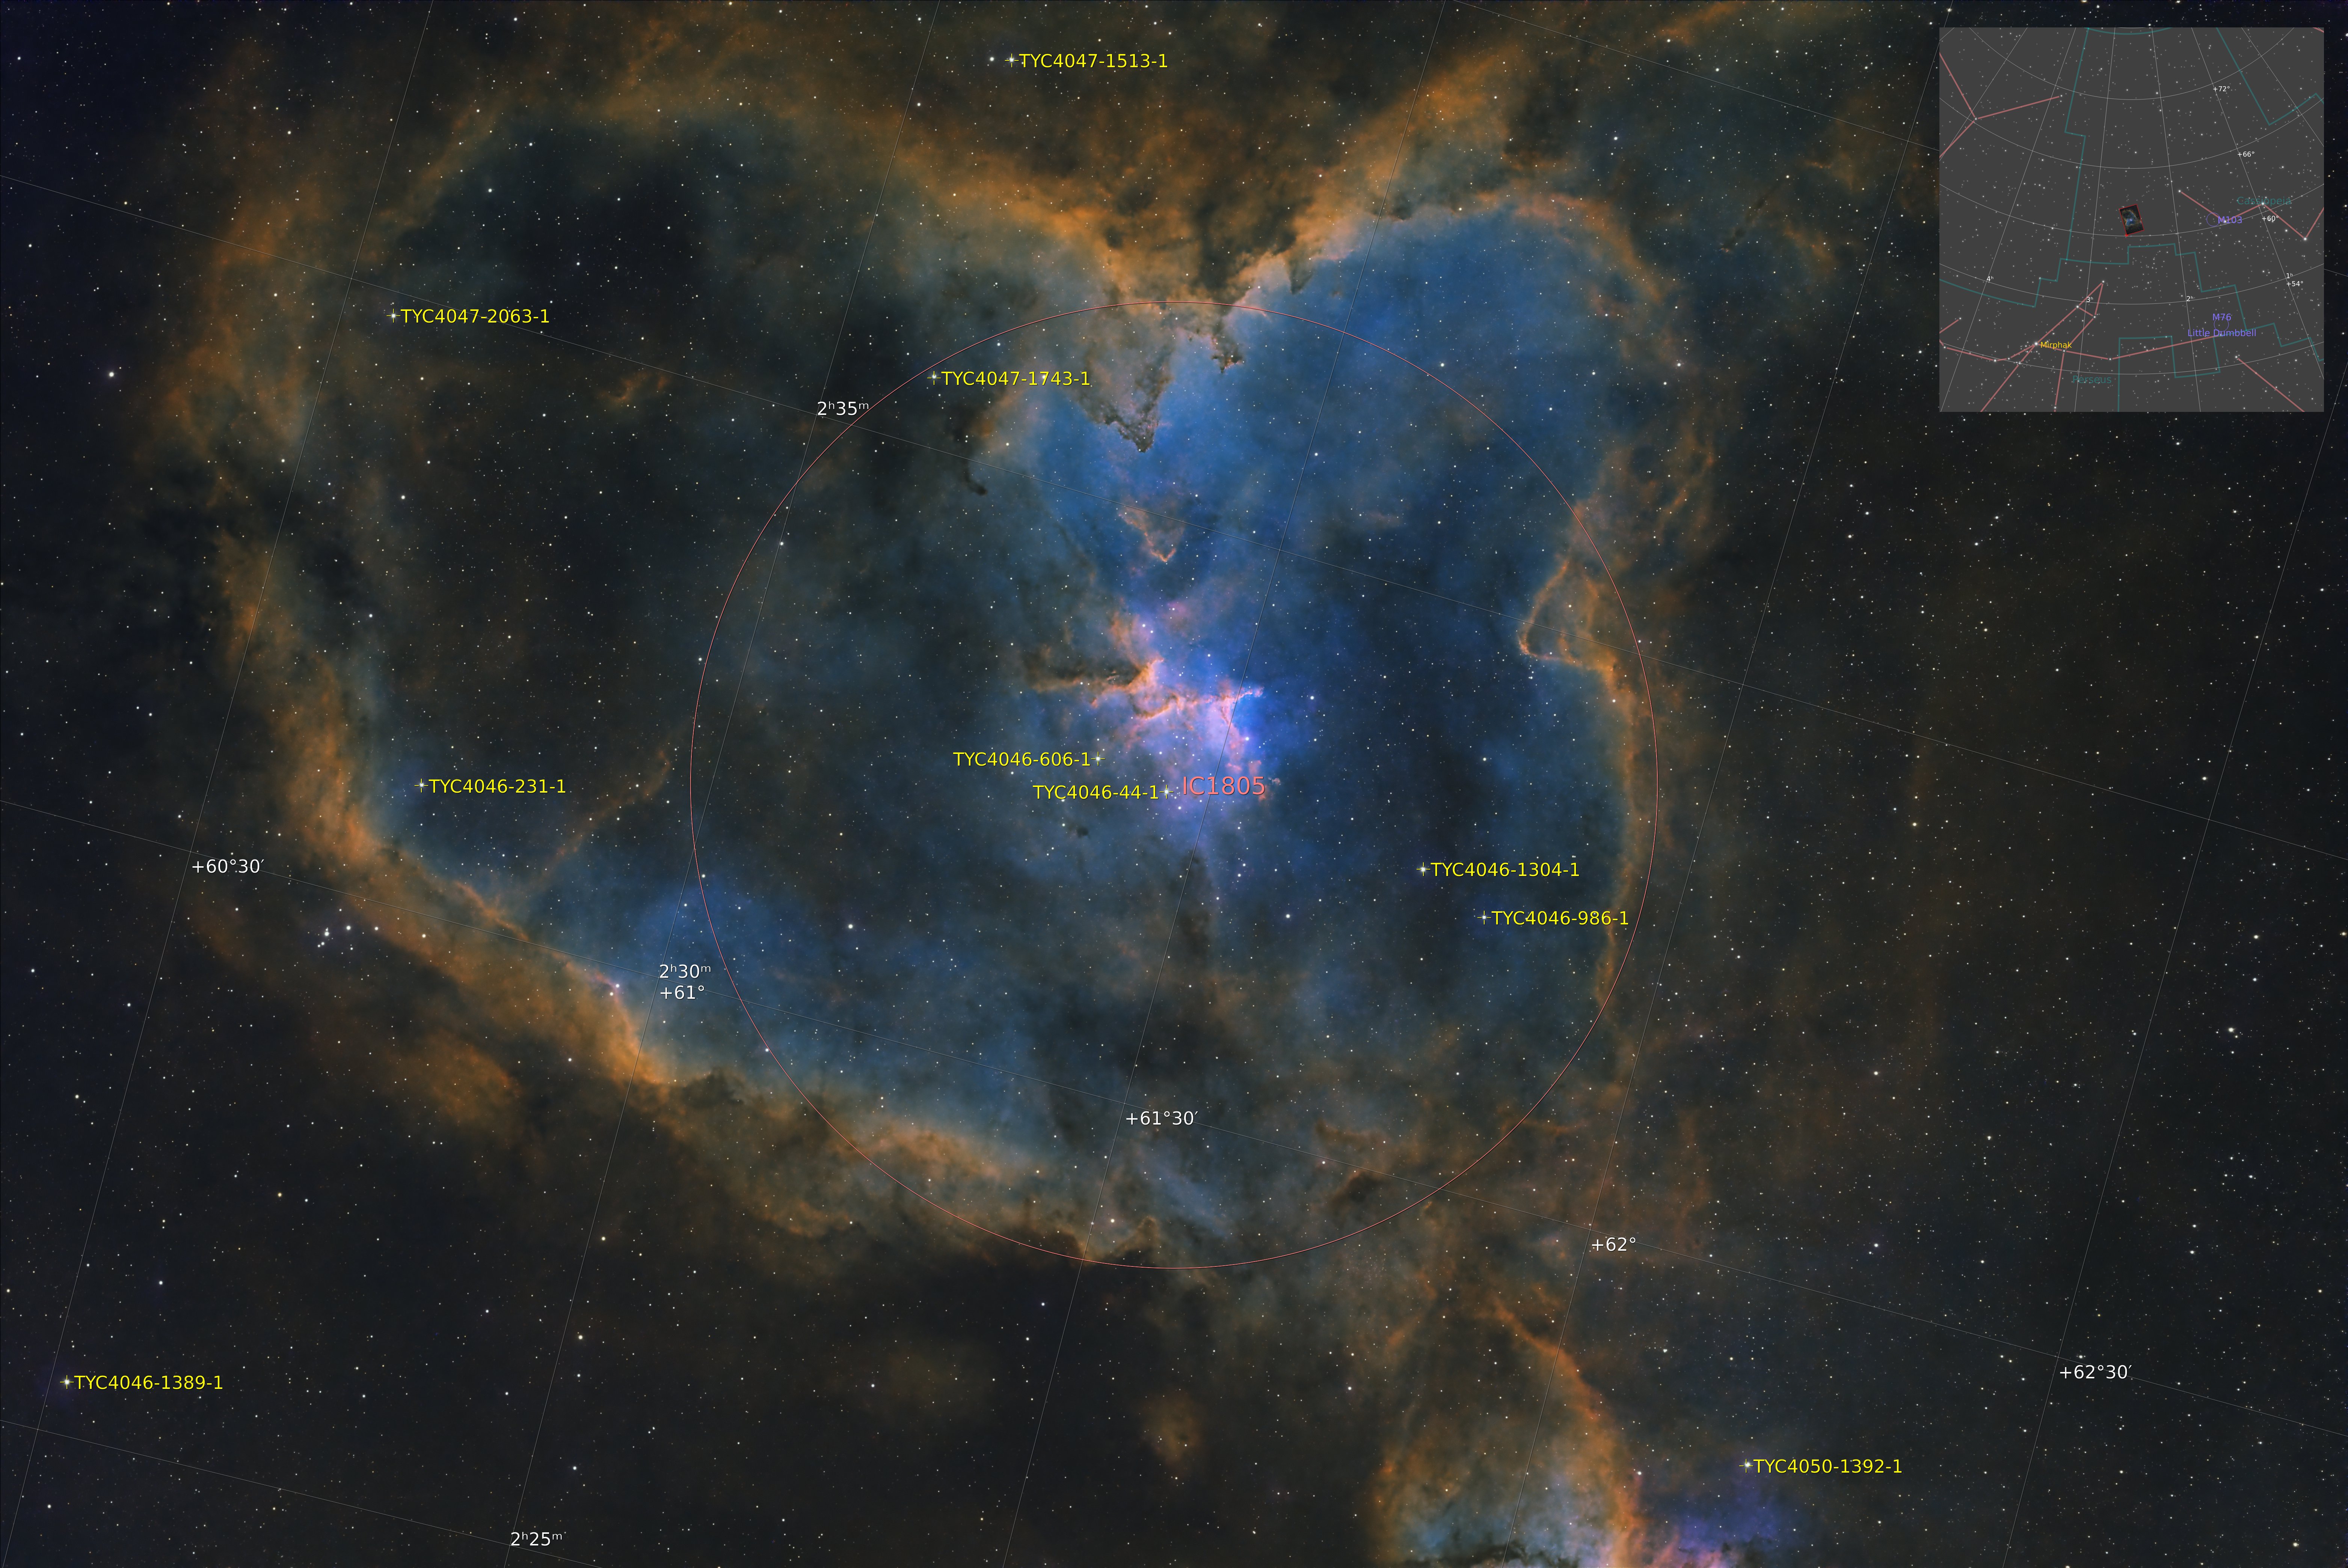 Melotte 15, annotated